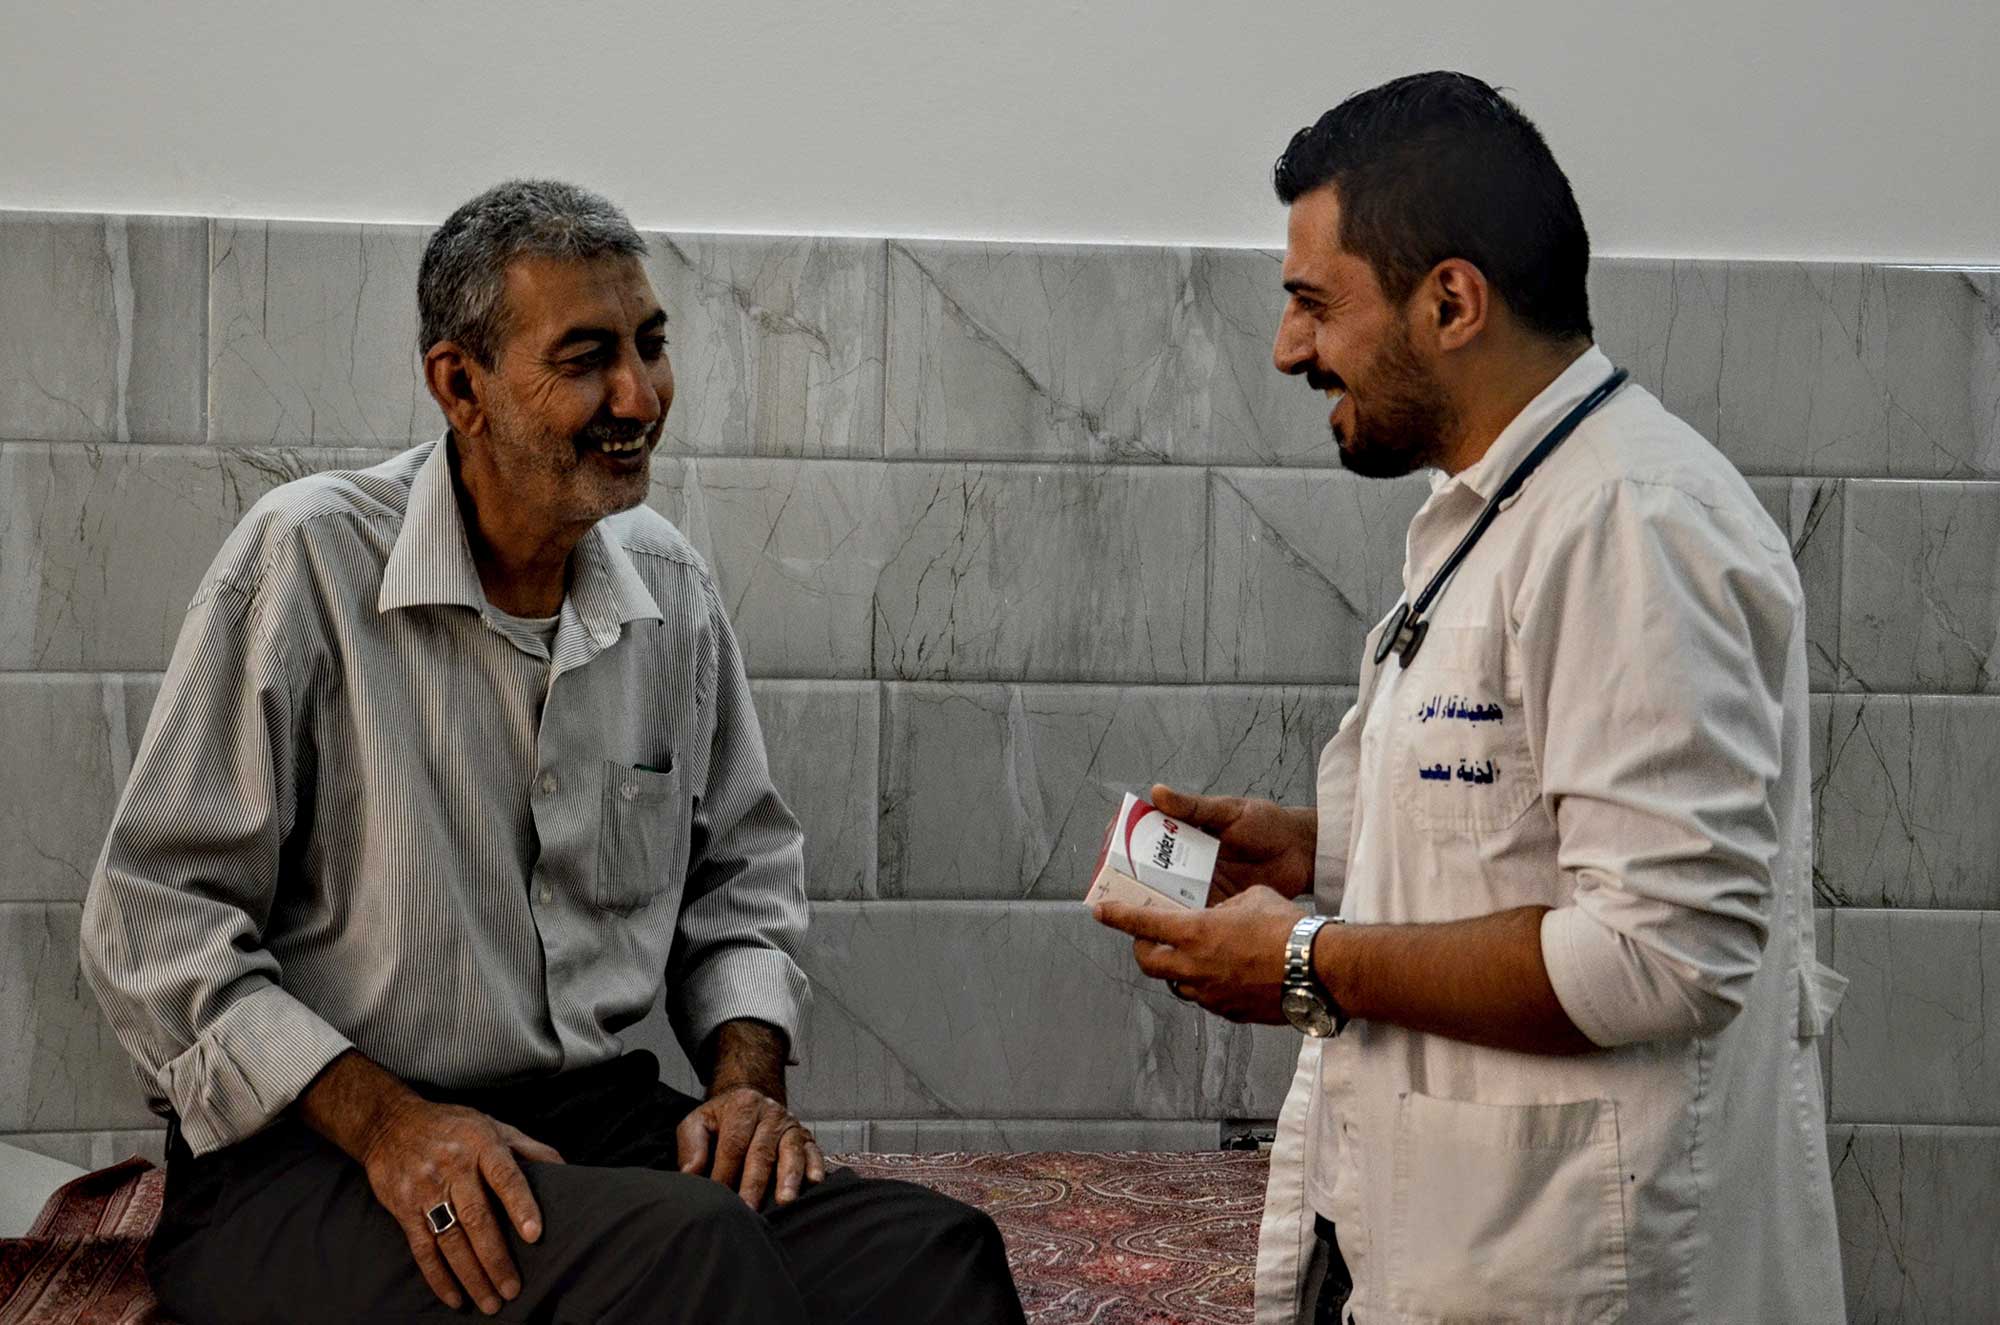 Mohammed gets advice from Foad Alkilani, a doctor at the Yabad Clinic.